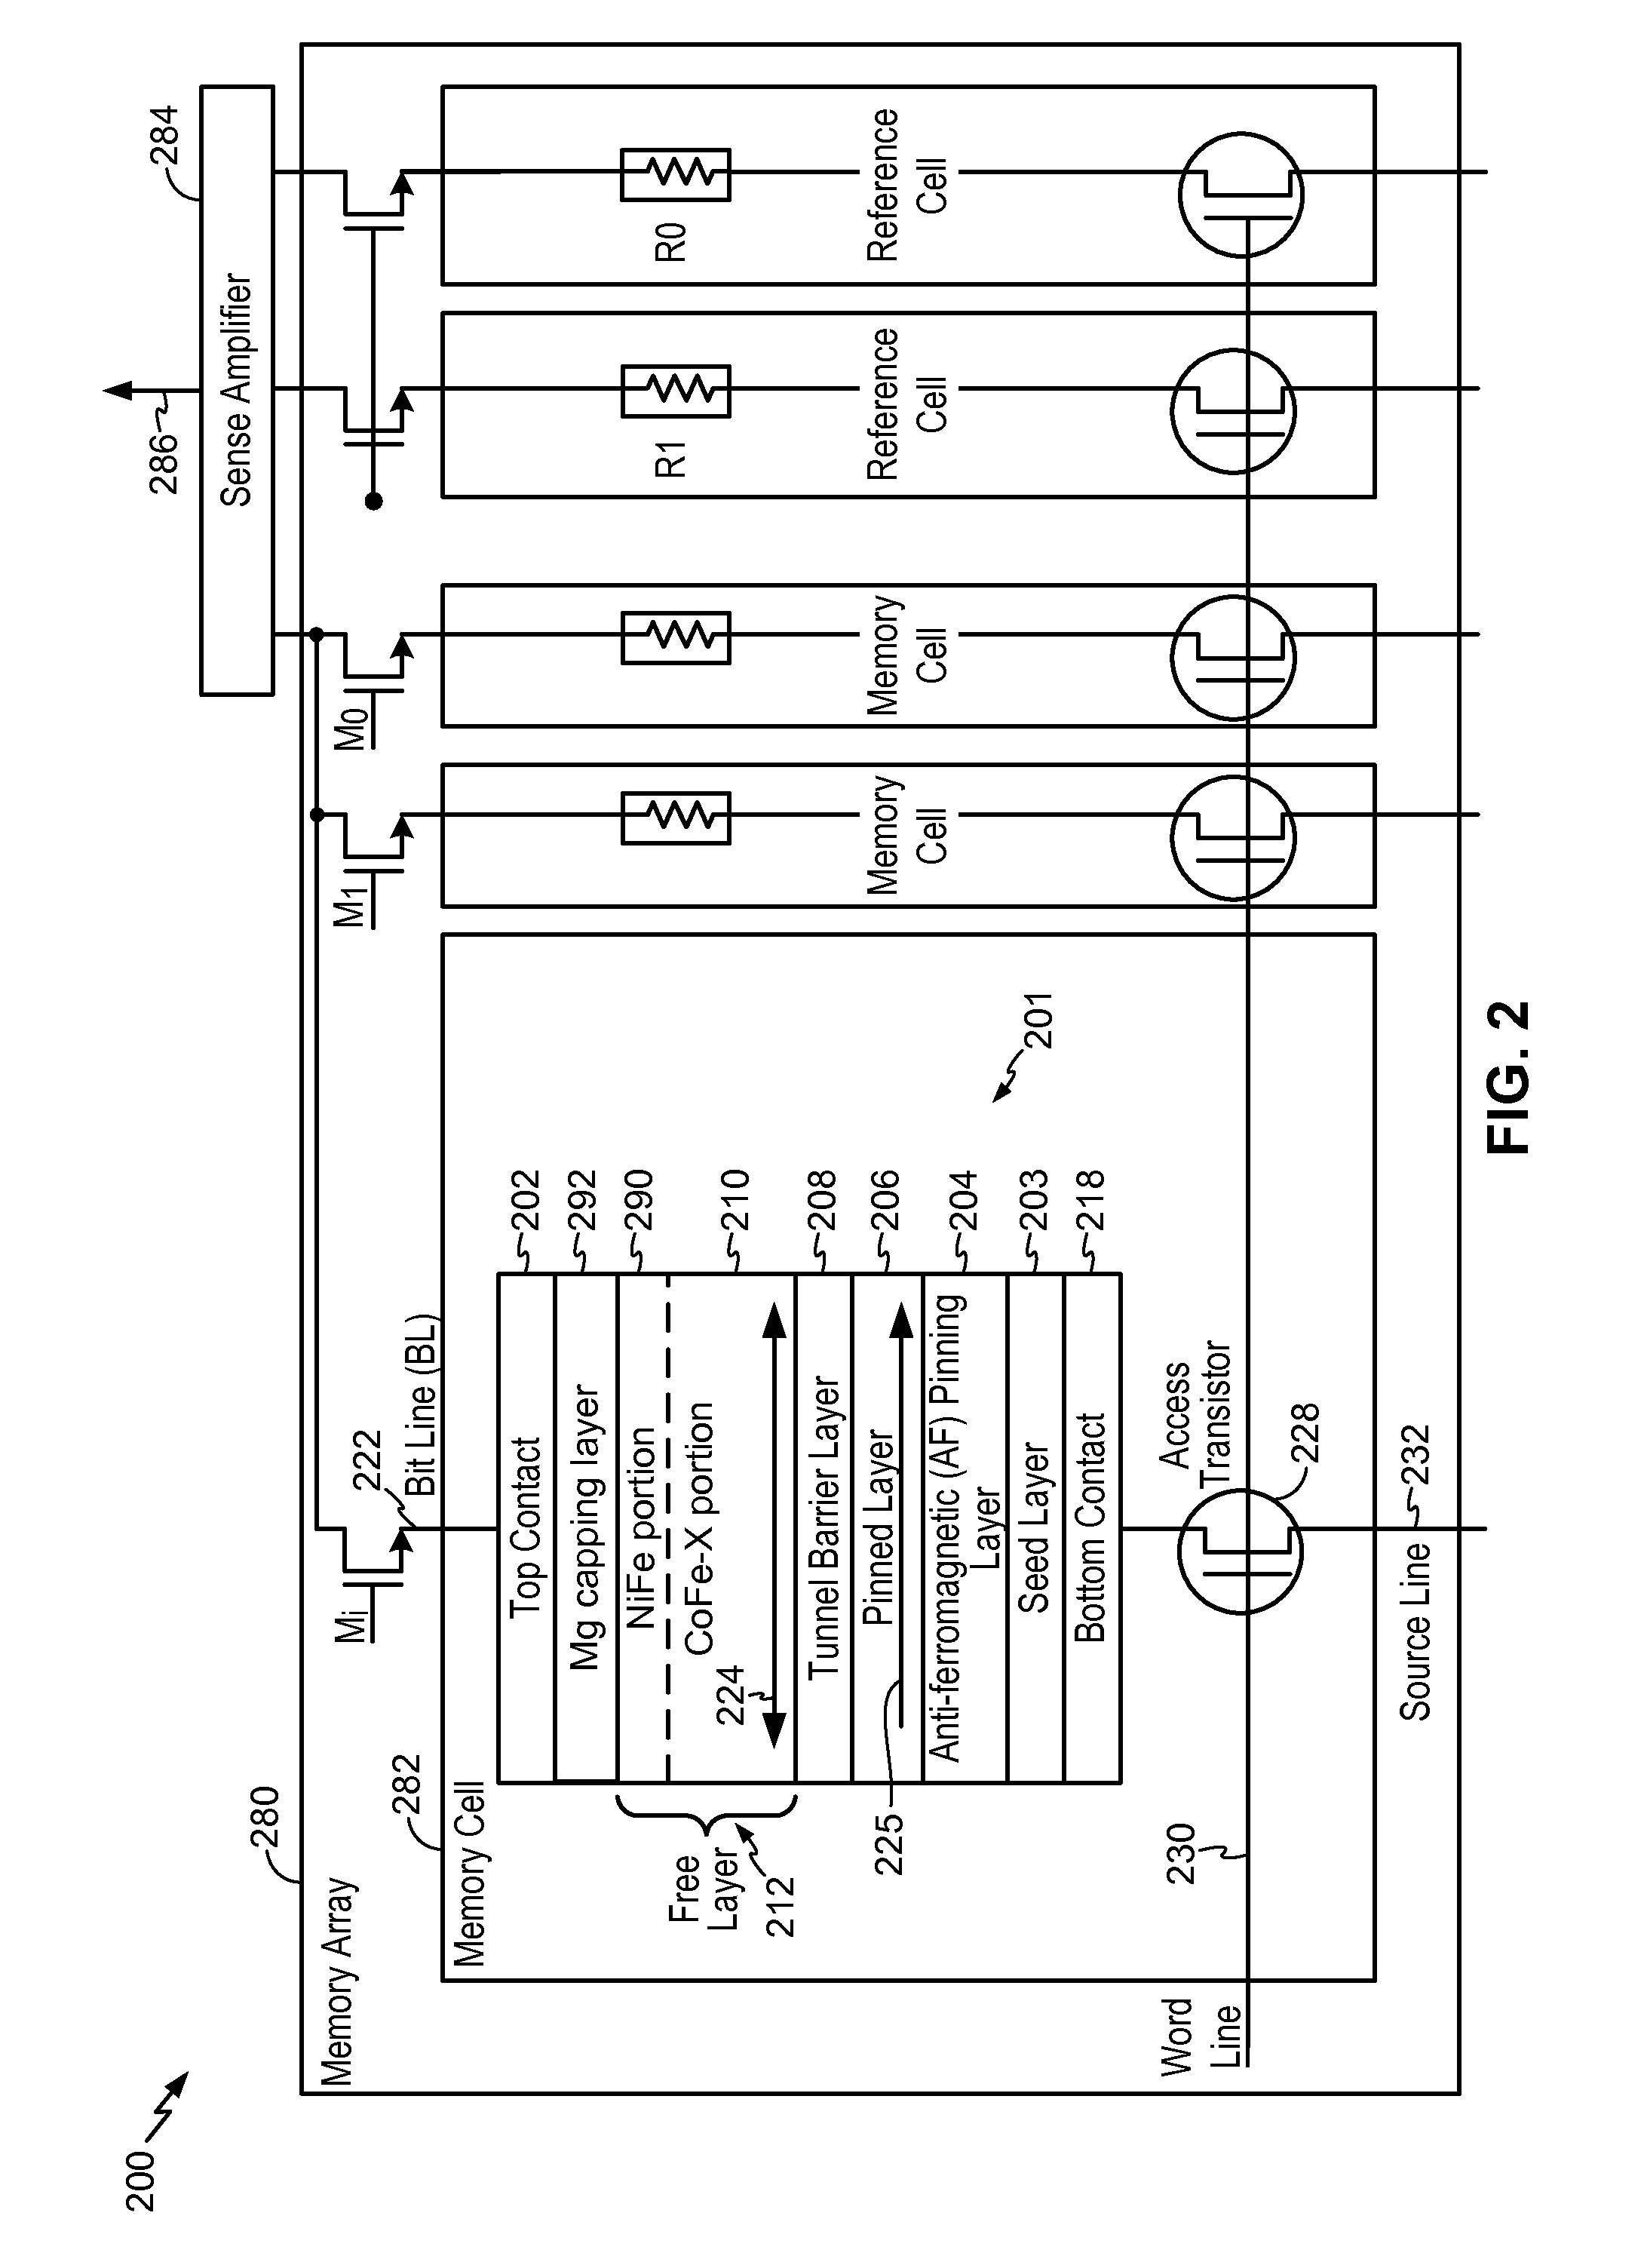 Magnetic Tunnel Junction Device and Fabrication